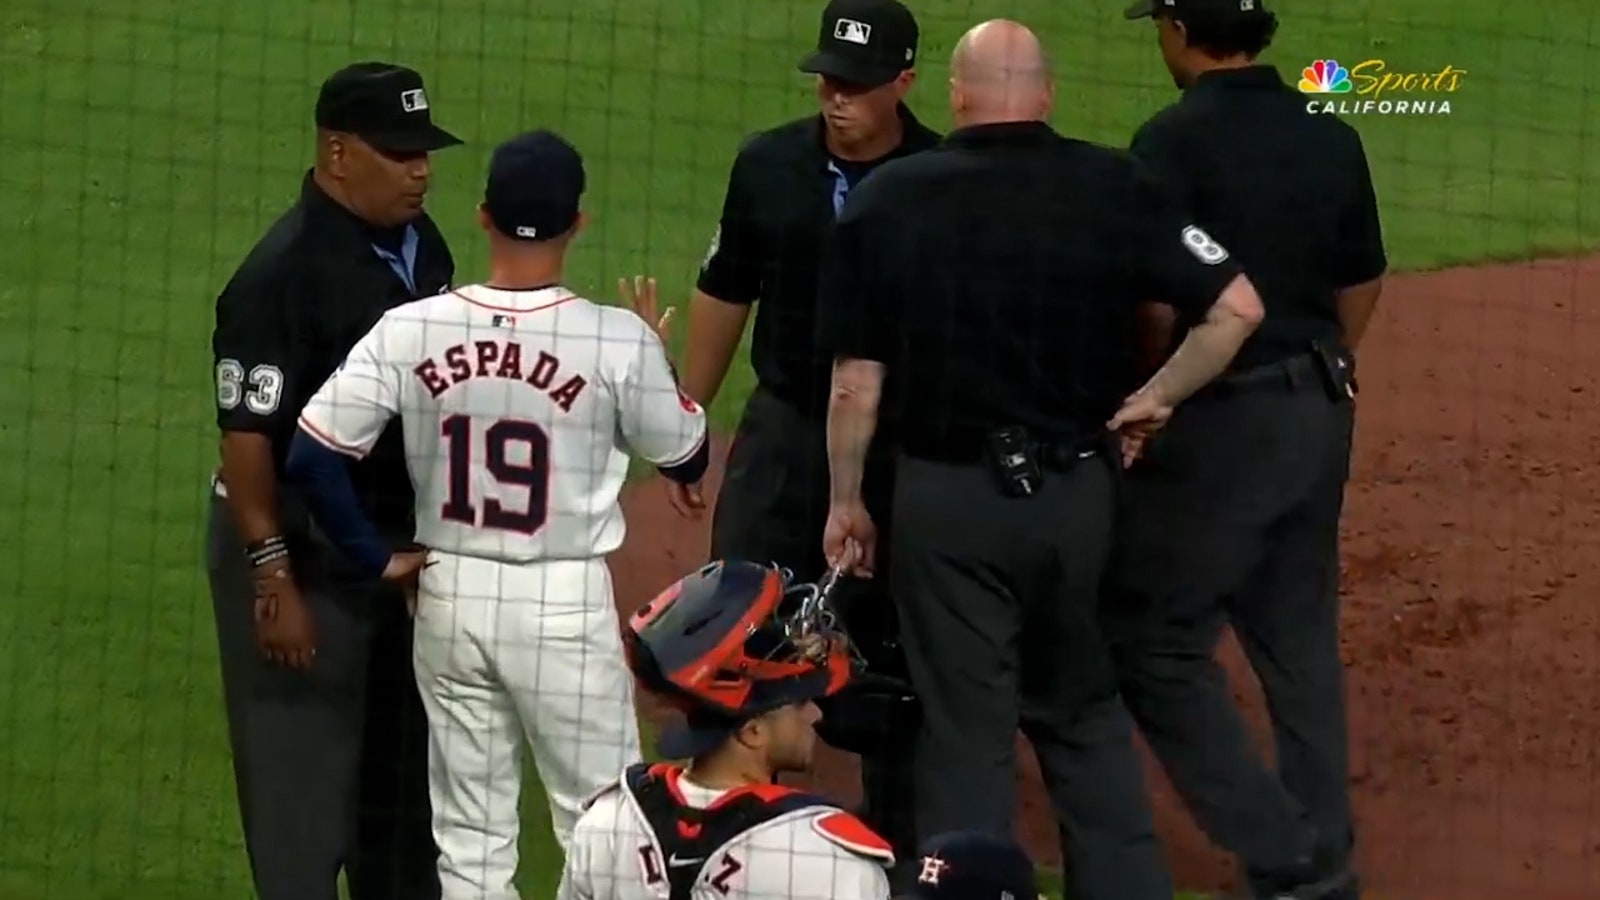 Astros pitcher Ronel Blanco ejected for use of foreign substance on glove